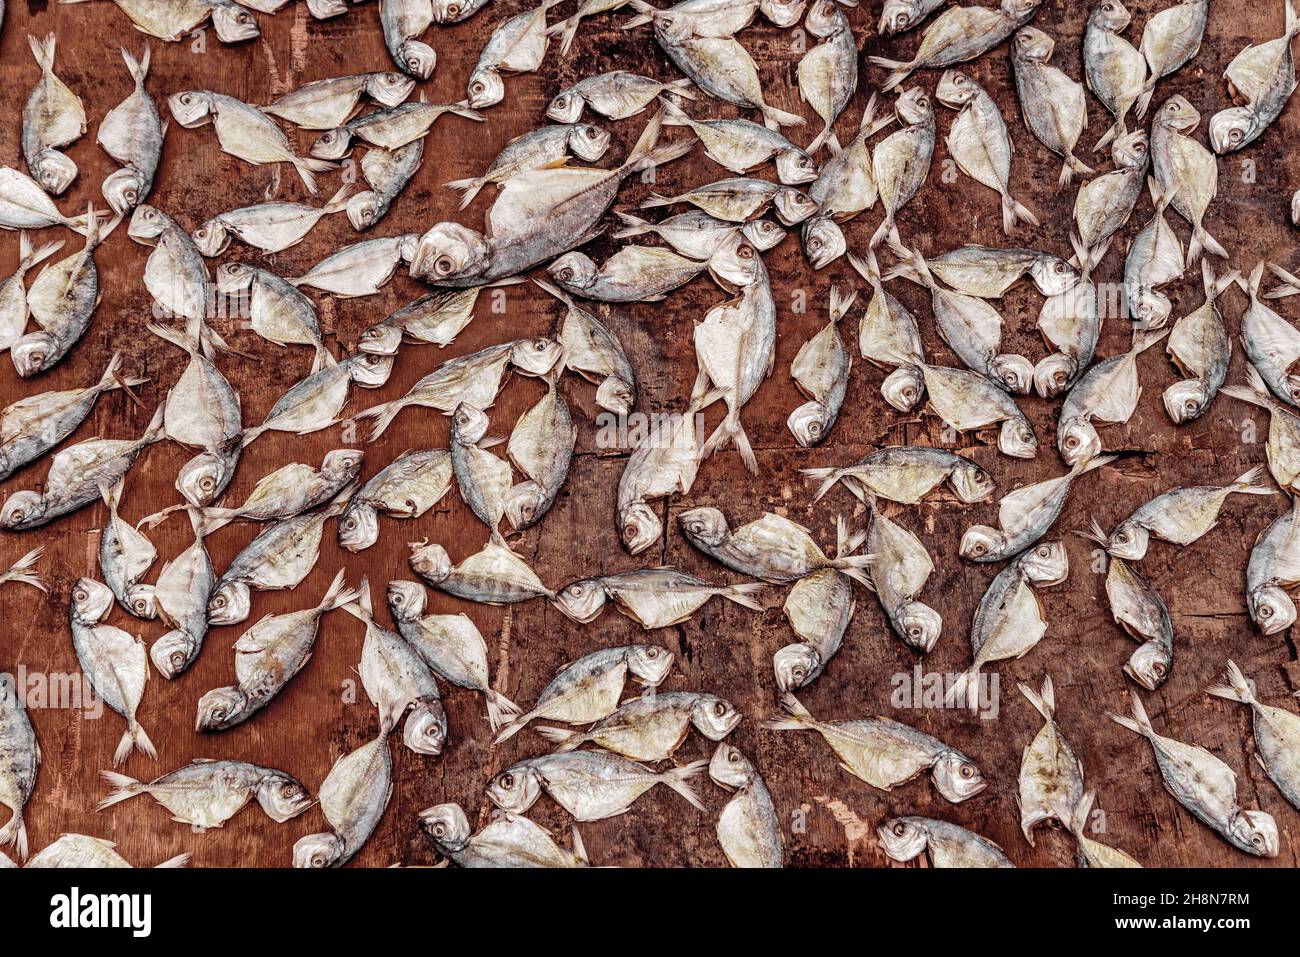 Fishes desiccated or sun dried fish Stock Photo